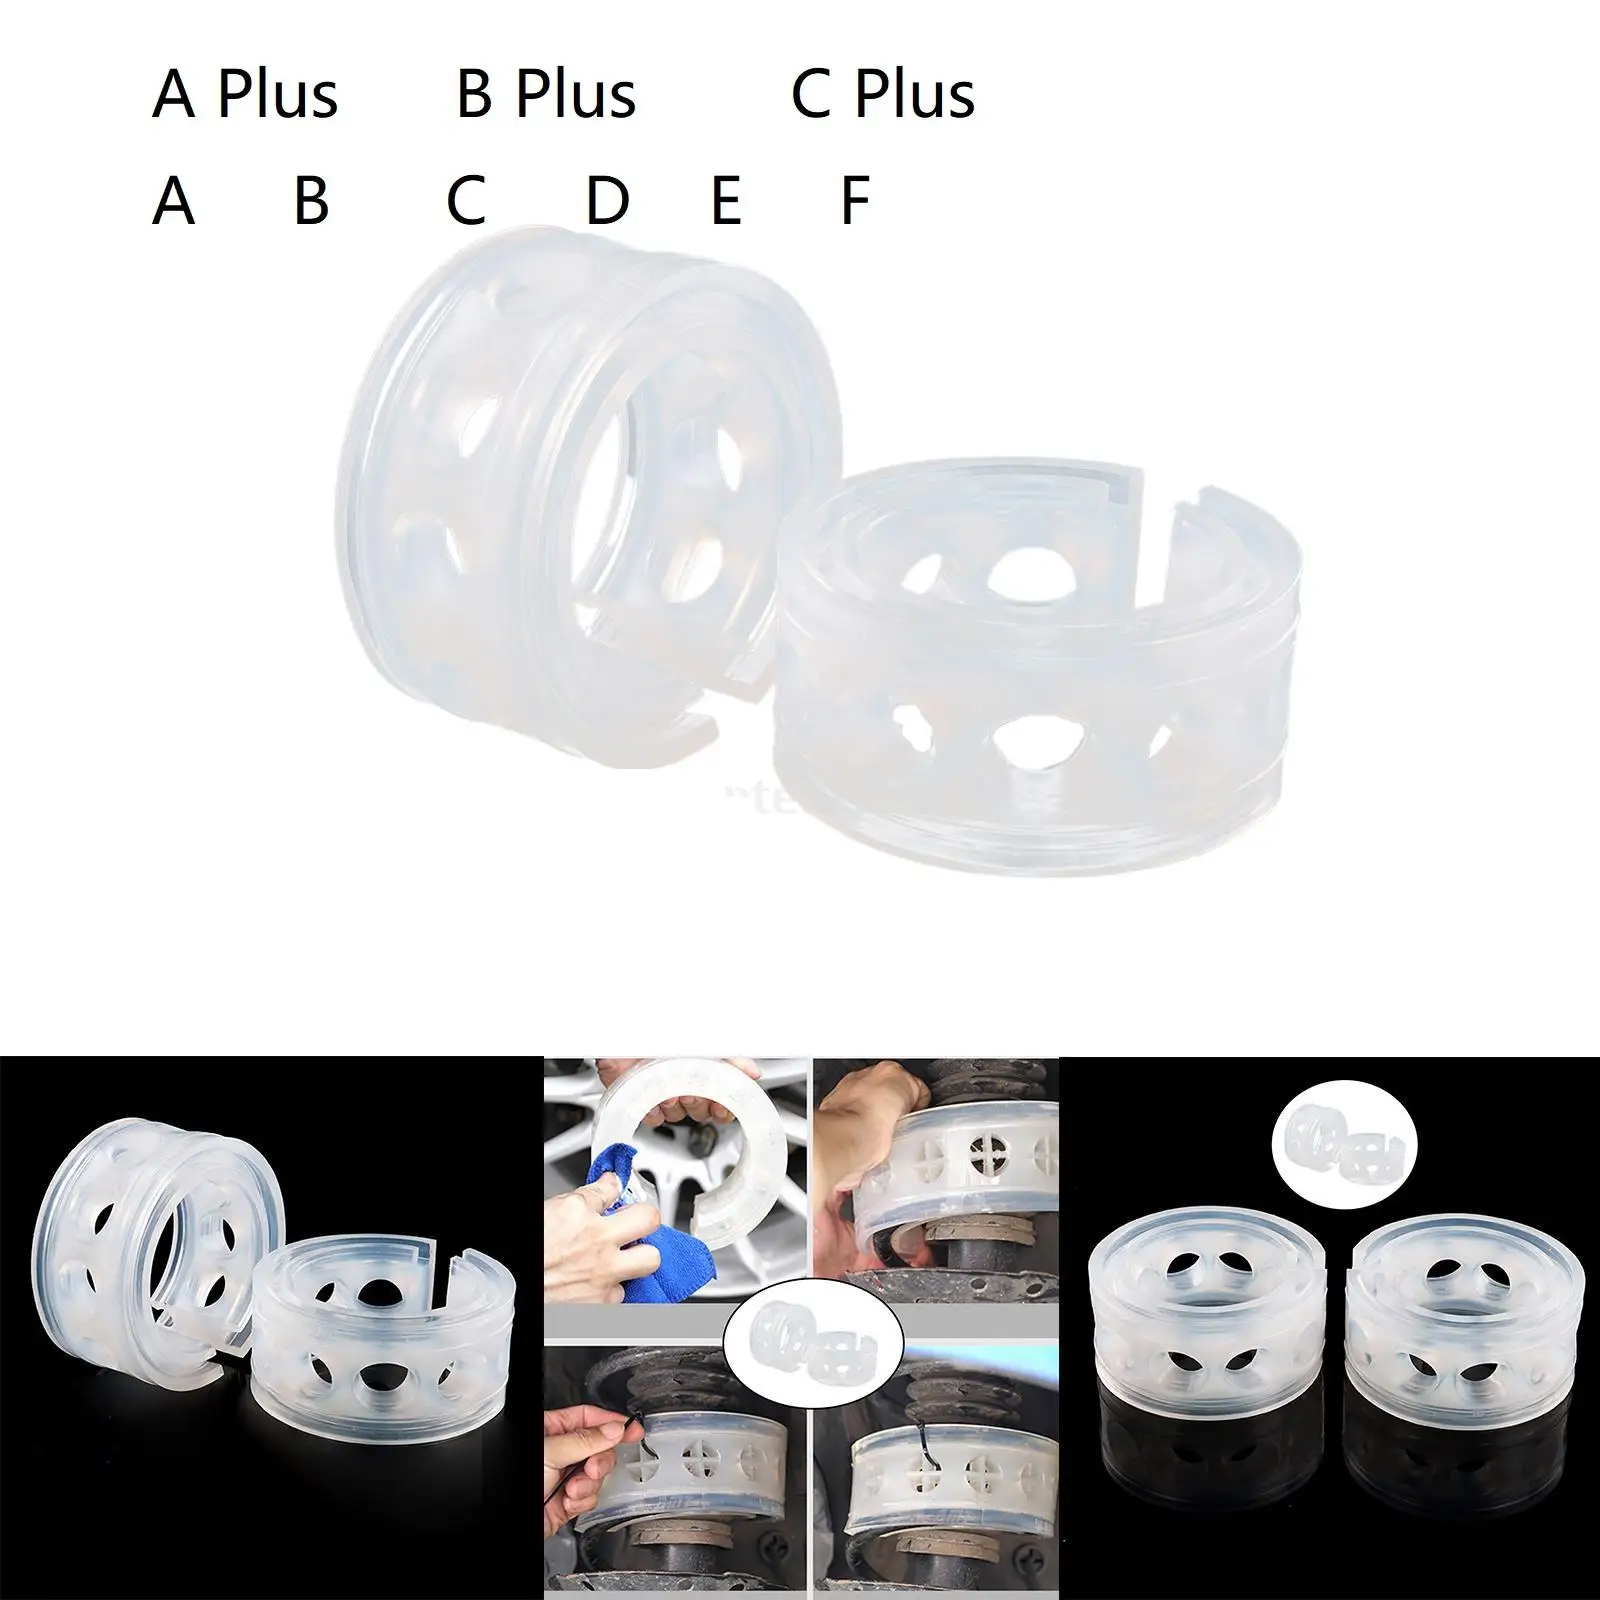 2x Transparent Car Shock Absorber Spring Bumper Buffers Power Auto Rubber Cushion Strength Safety